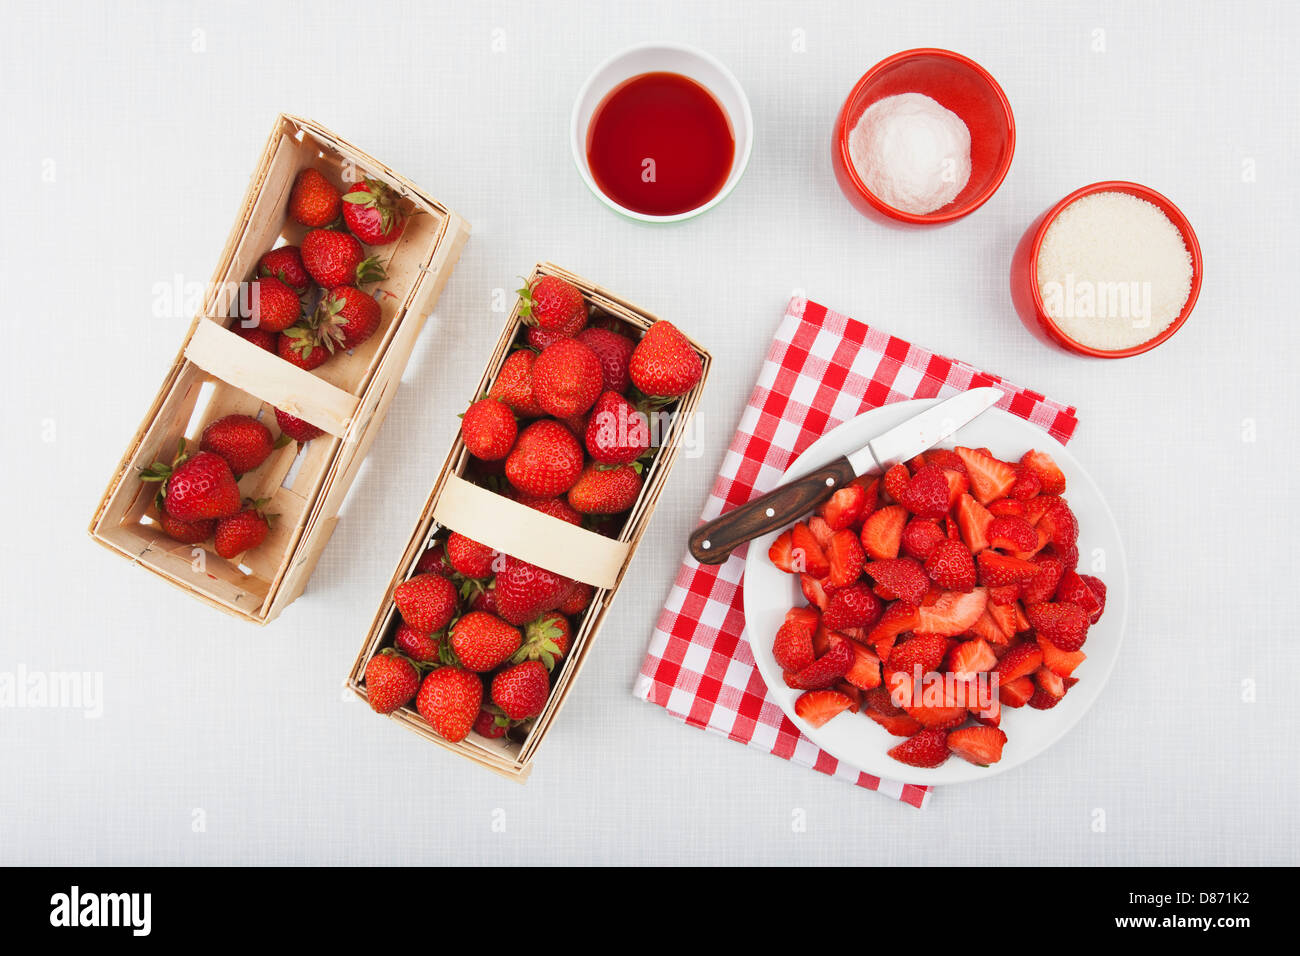 Cane sugar and pectin for strawberry jam with fresh strawberries in wooden basket Stock Photo